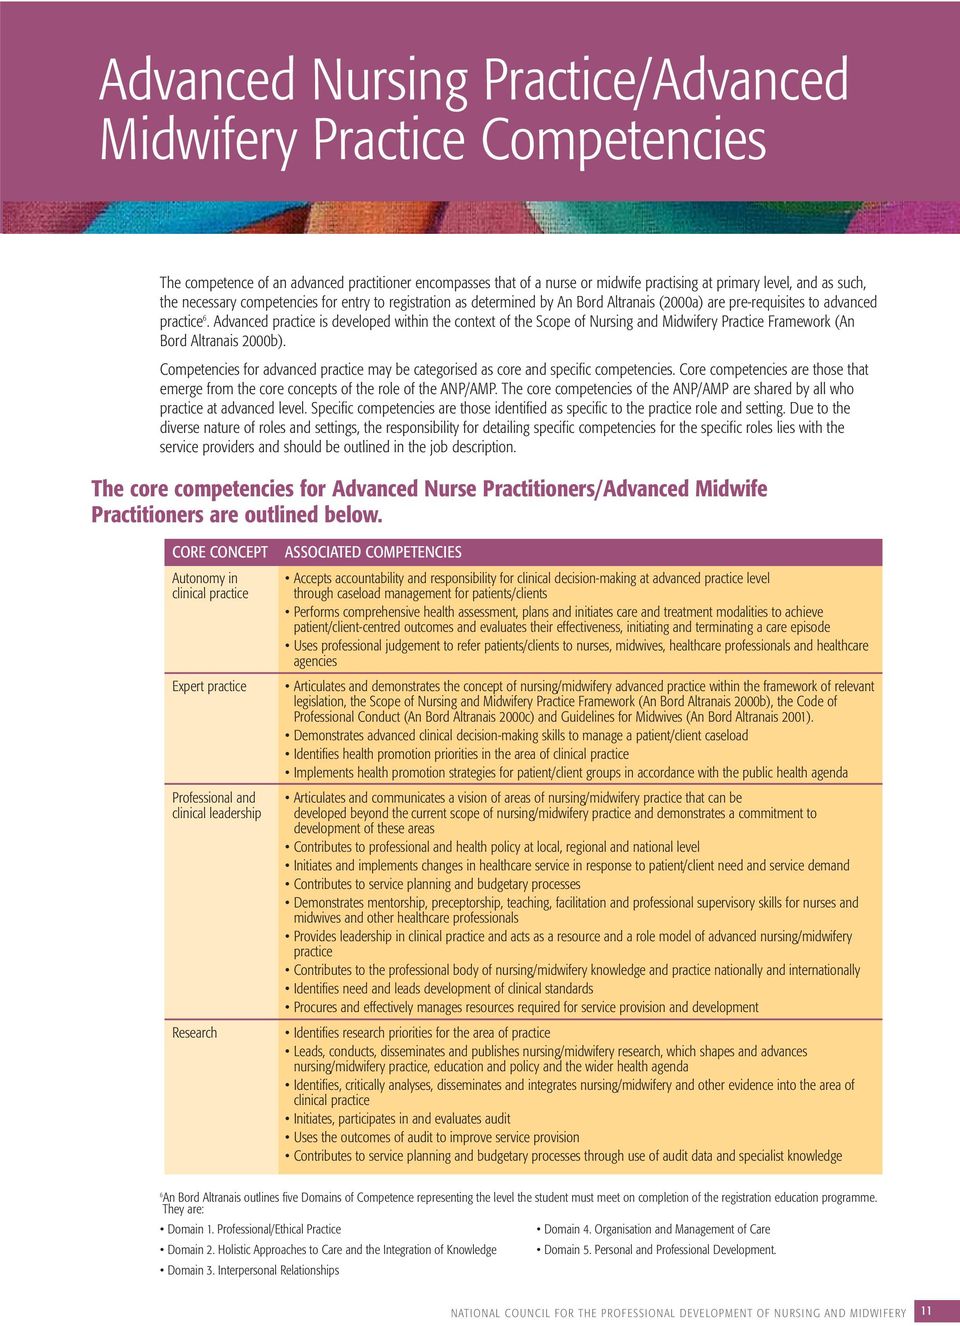 Advanced practice is developed within the context of the Scope of Nursing and Midwifery Practice Framework (An Bord Altranais 2000b).